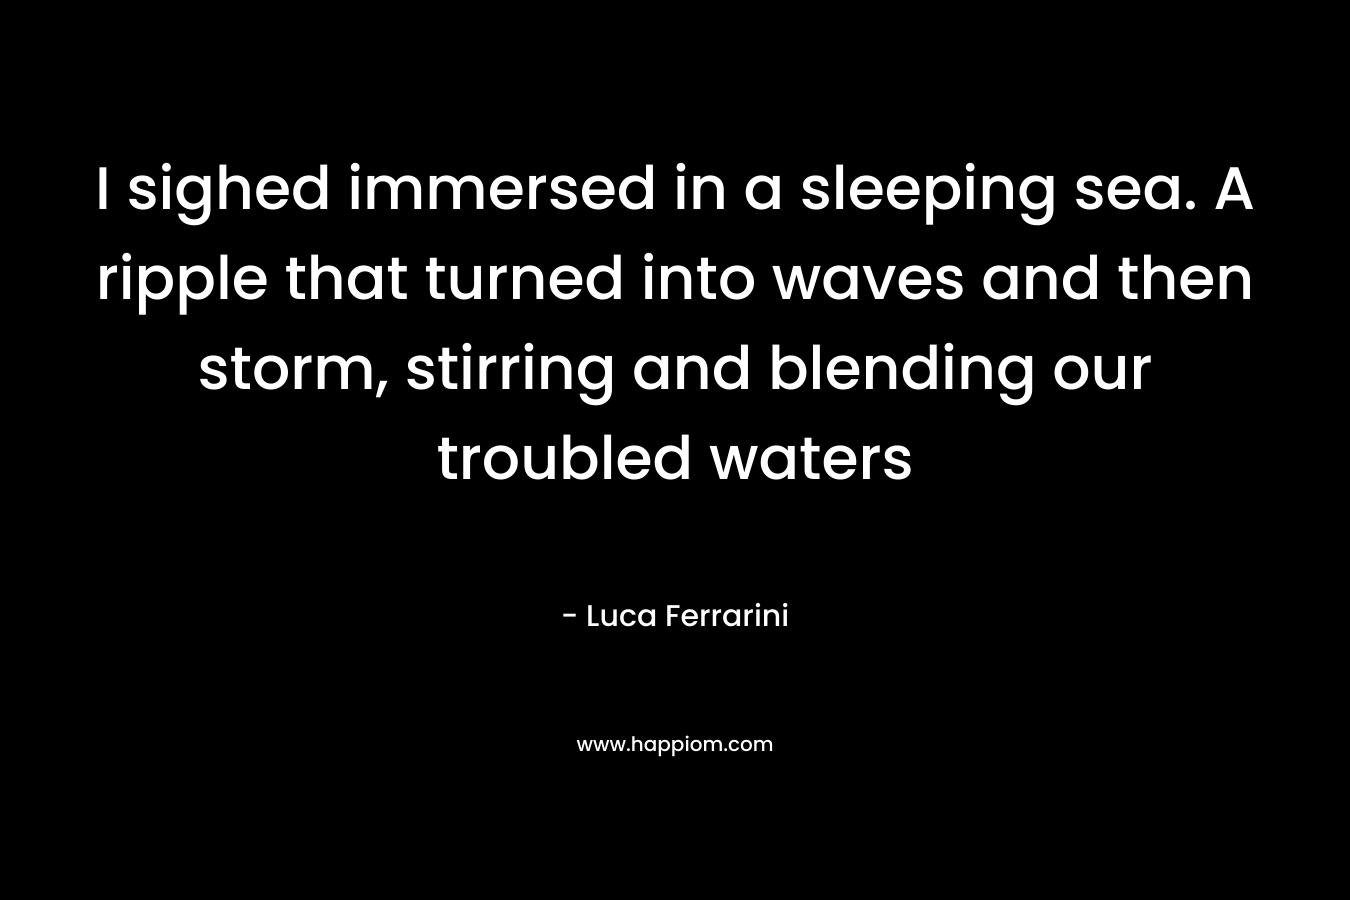 I sighed immersed in a sleeping sea. A ripple that turned into waves and then storm, stirring and blending our troubled waters – Luca Ferrarini